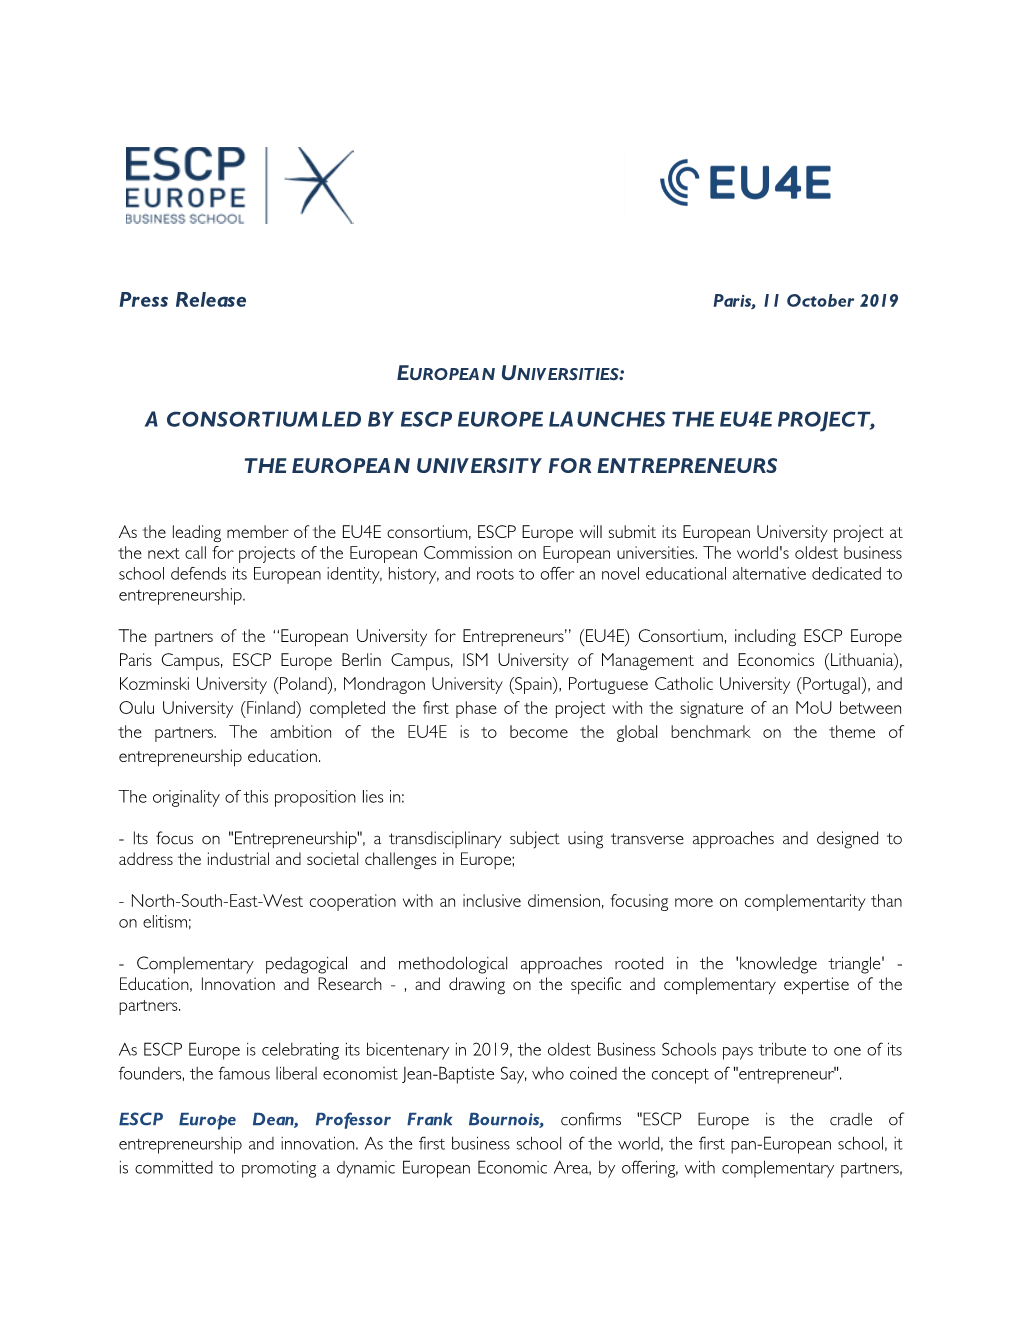 Press Release a CONSORTIUMLED by ESCP EUROPE LAUNCHES